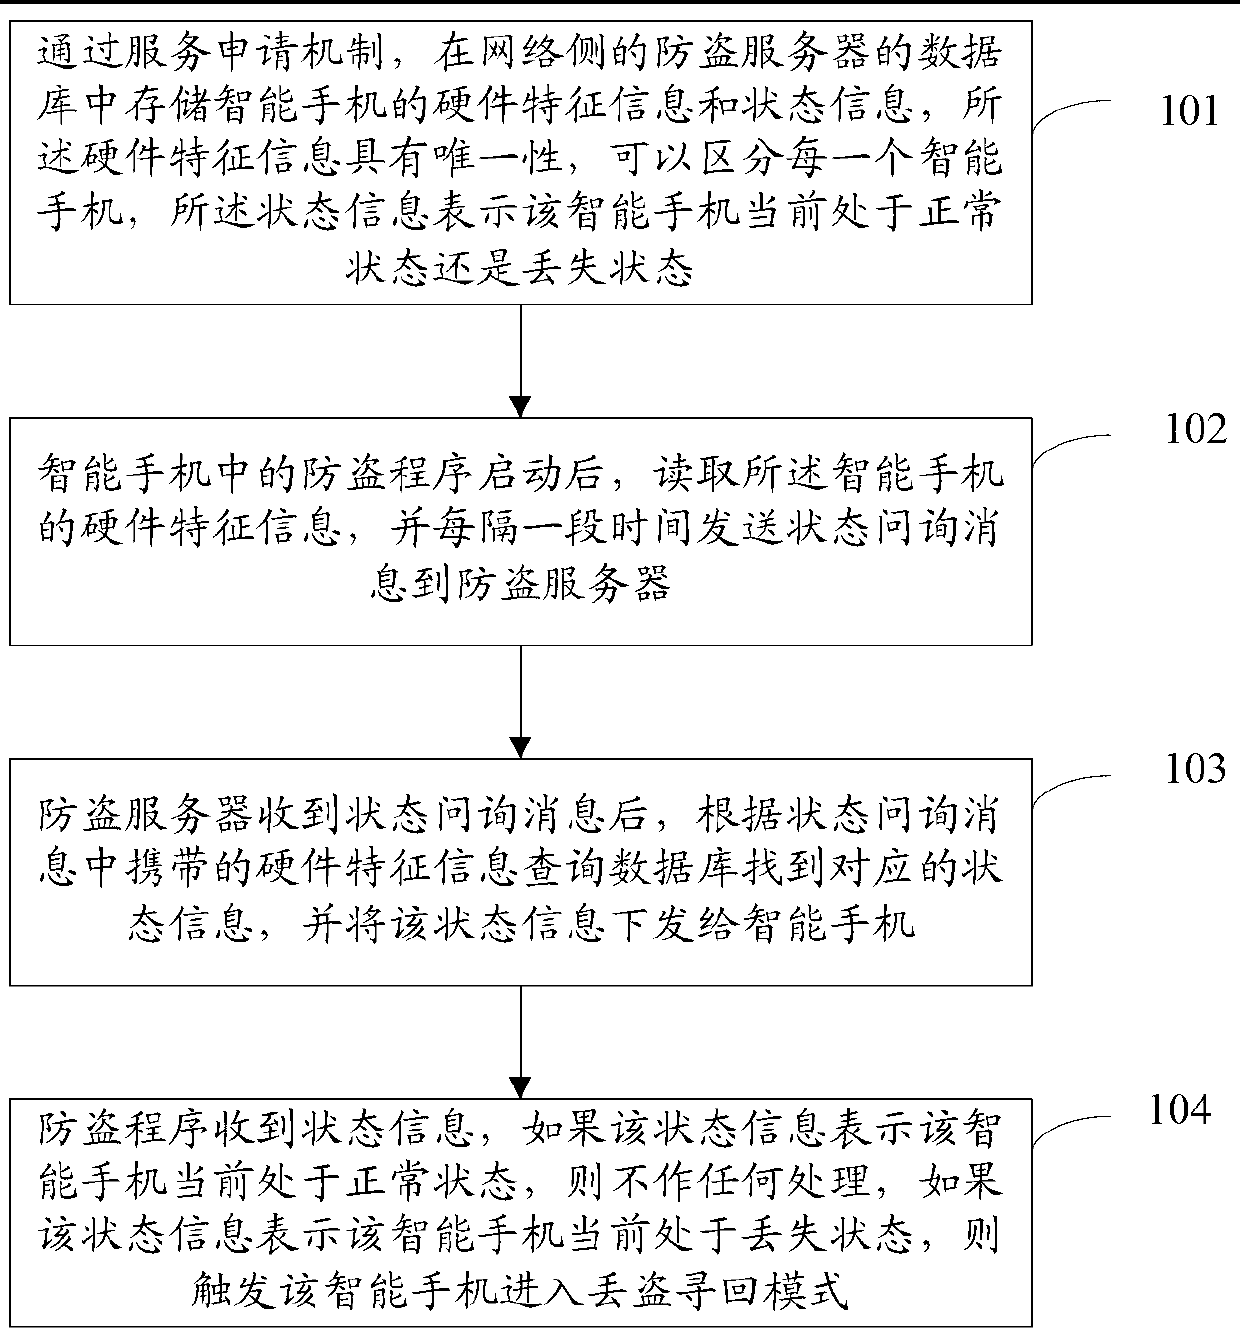 Intelligent mobile phone anti-theft method and system